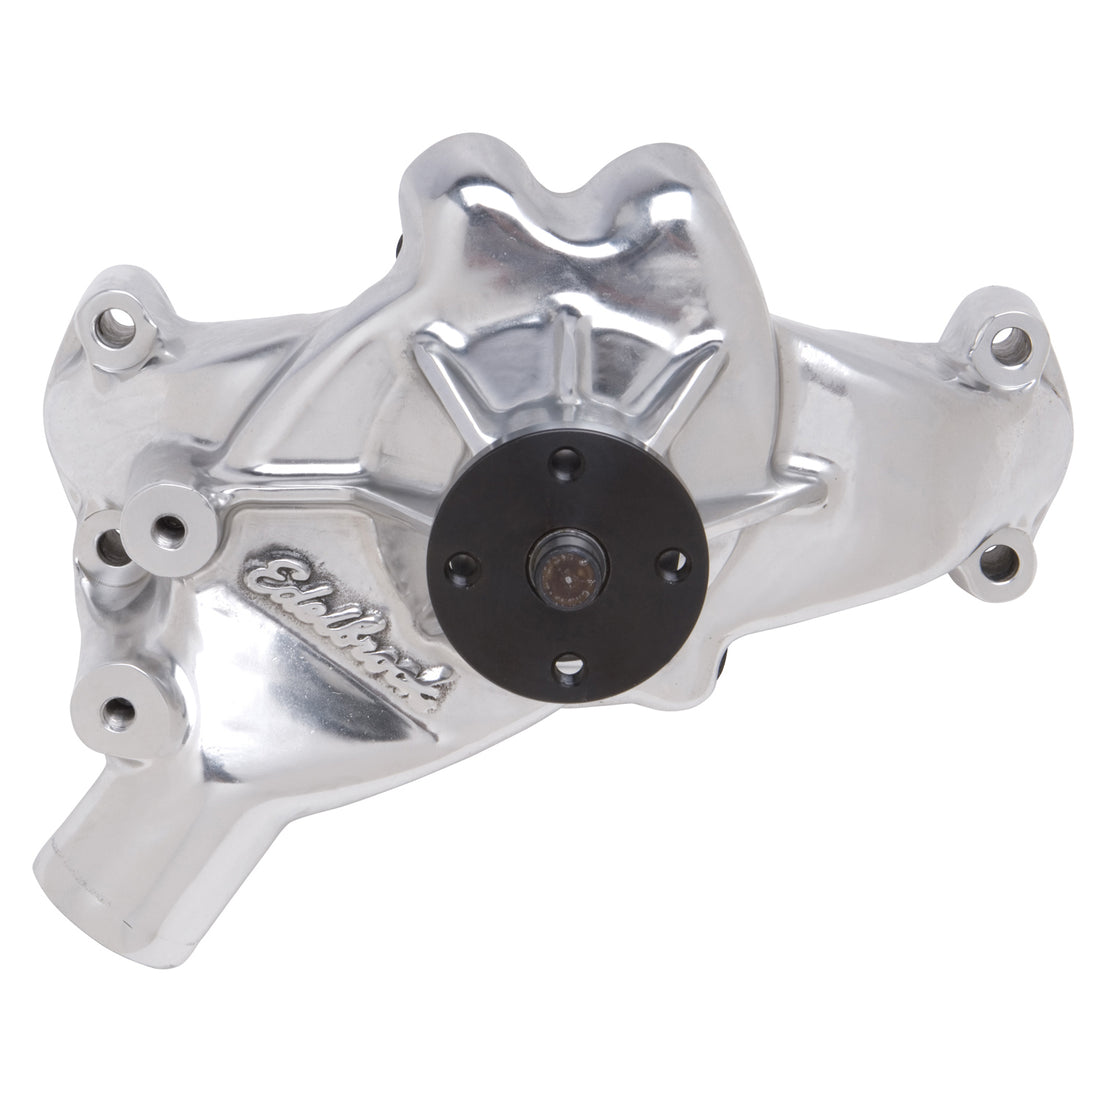 Water Pump for 1988 and later C/K pickups in Polished Finish Edelbrock